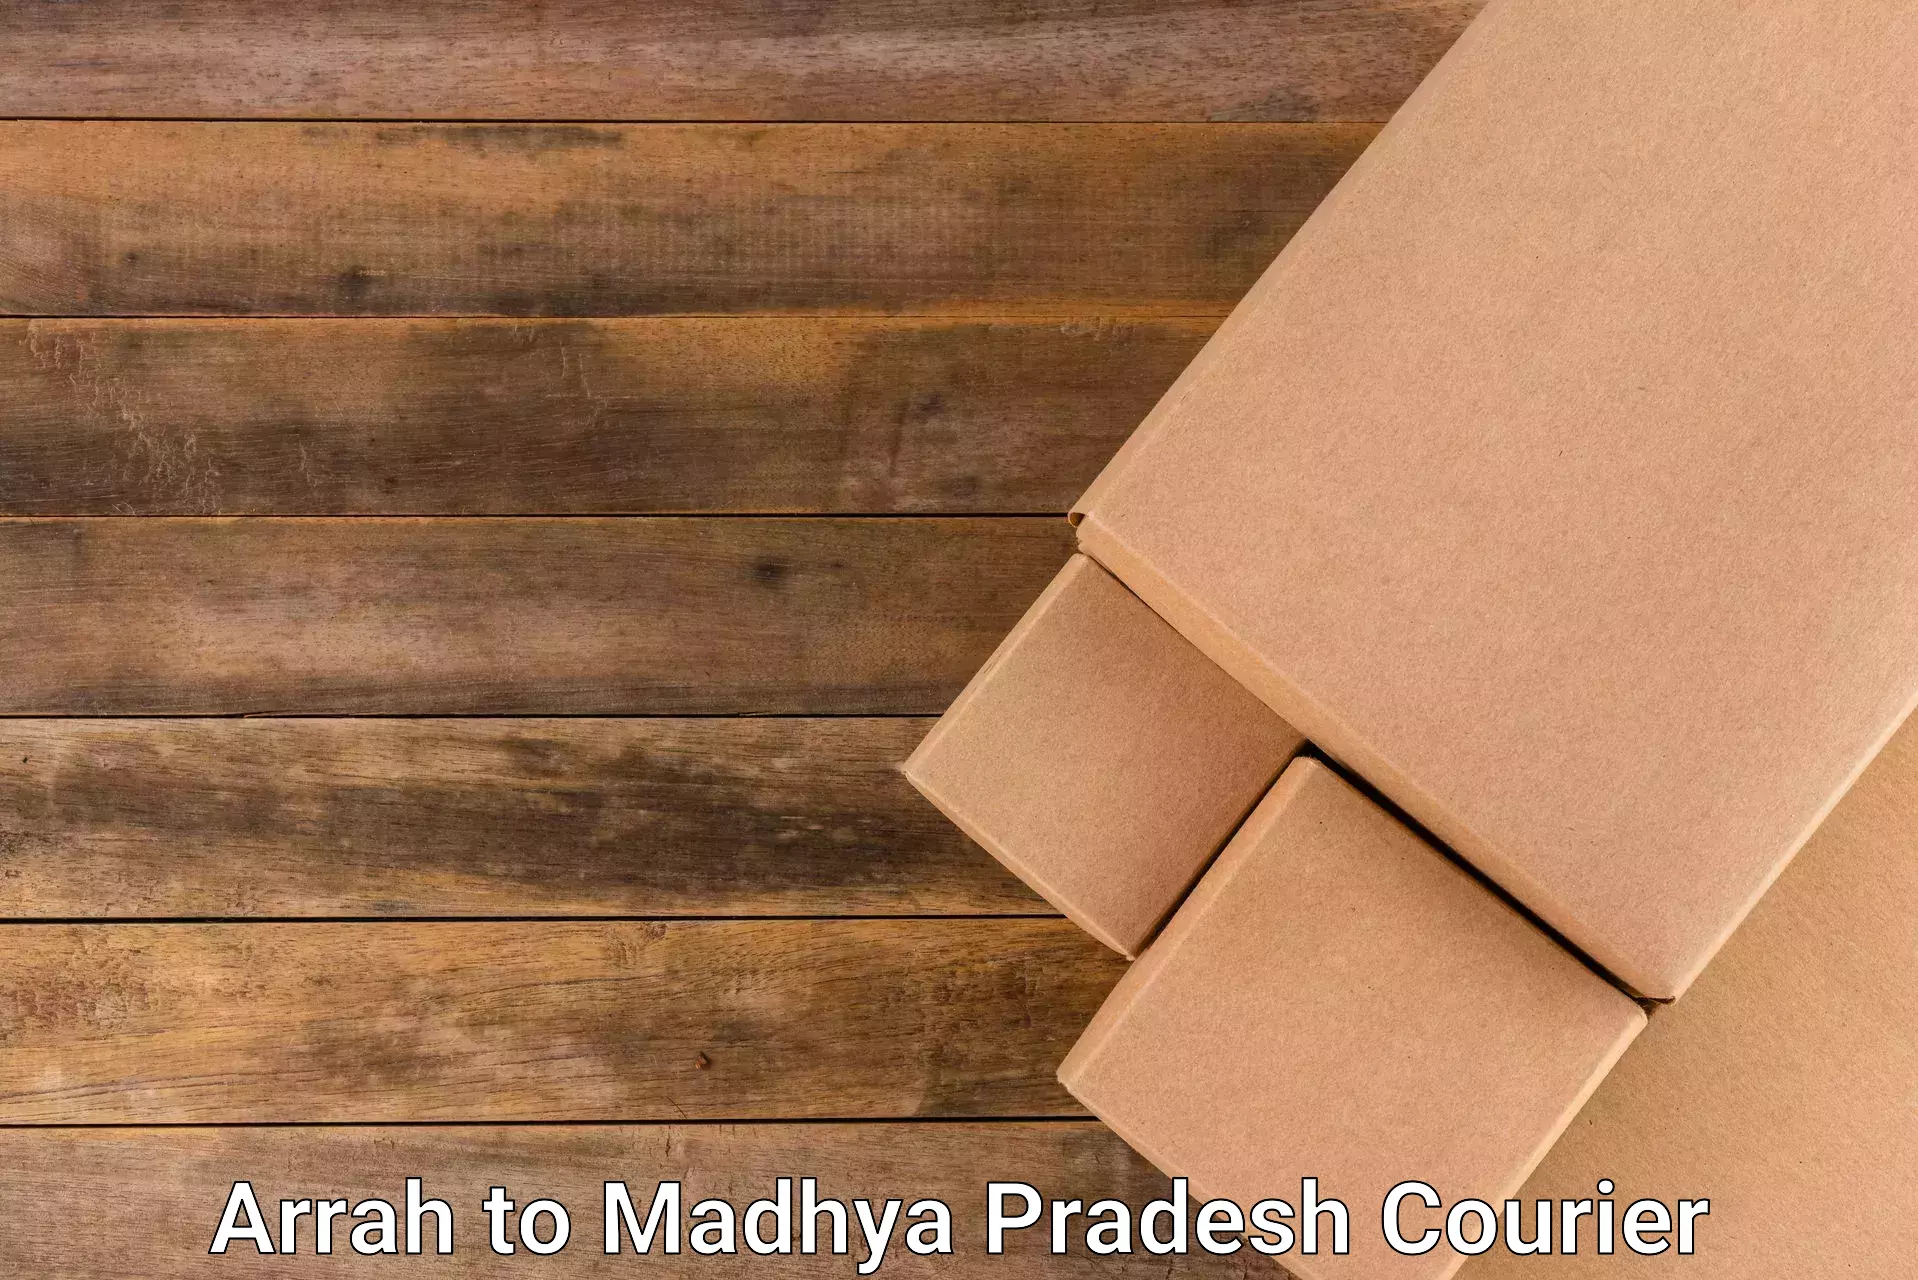 Round-the-clock parcel delivery Arrah to Madhya Pradesh